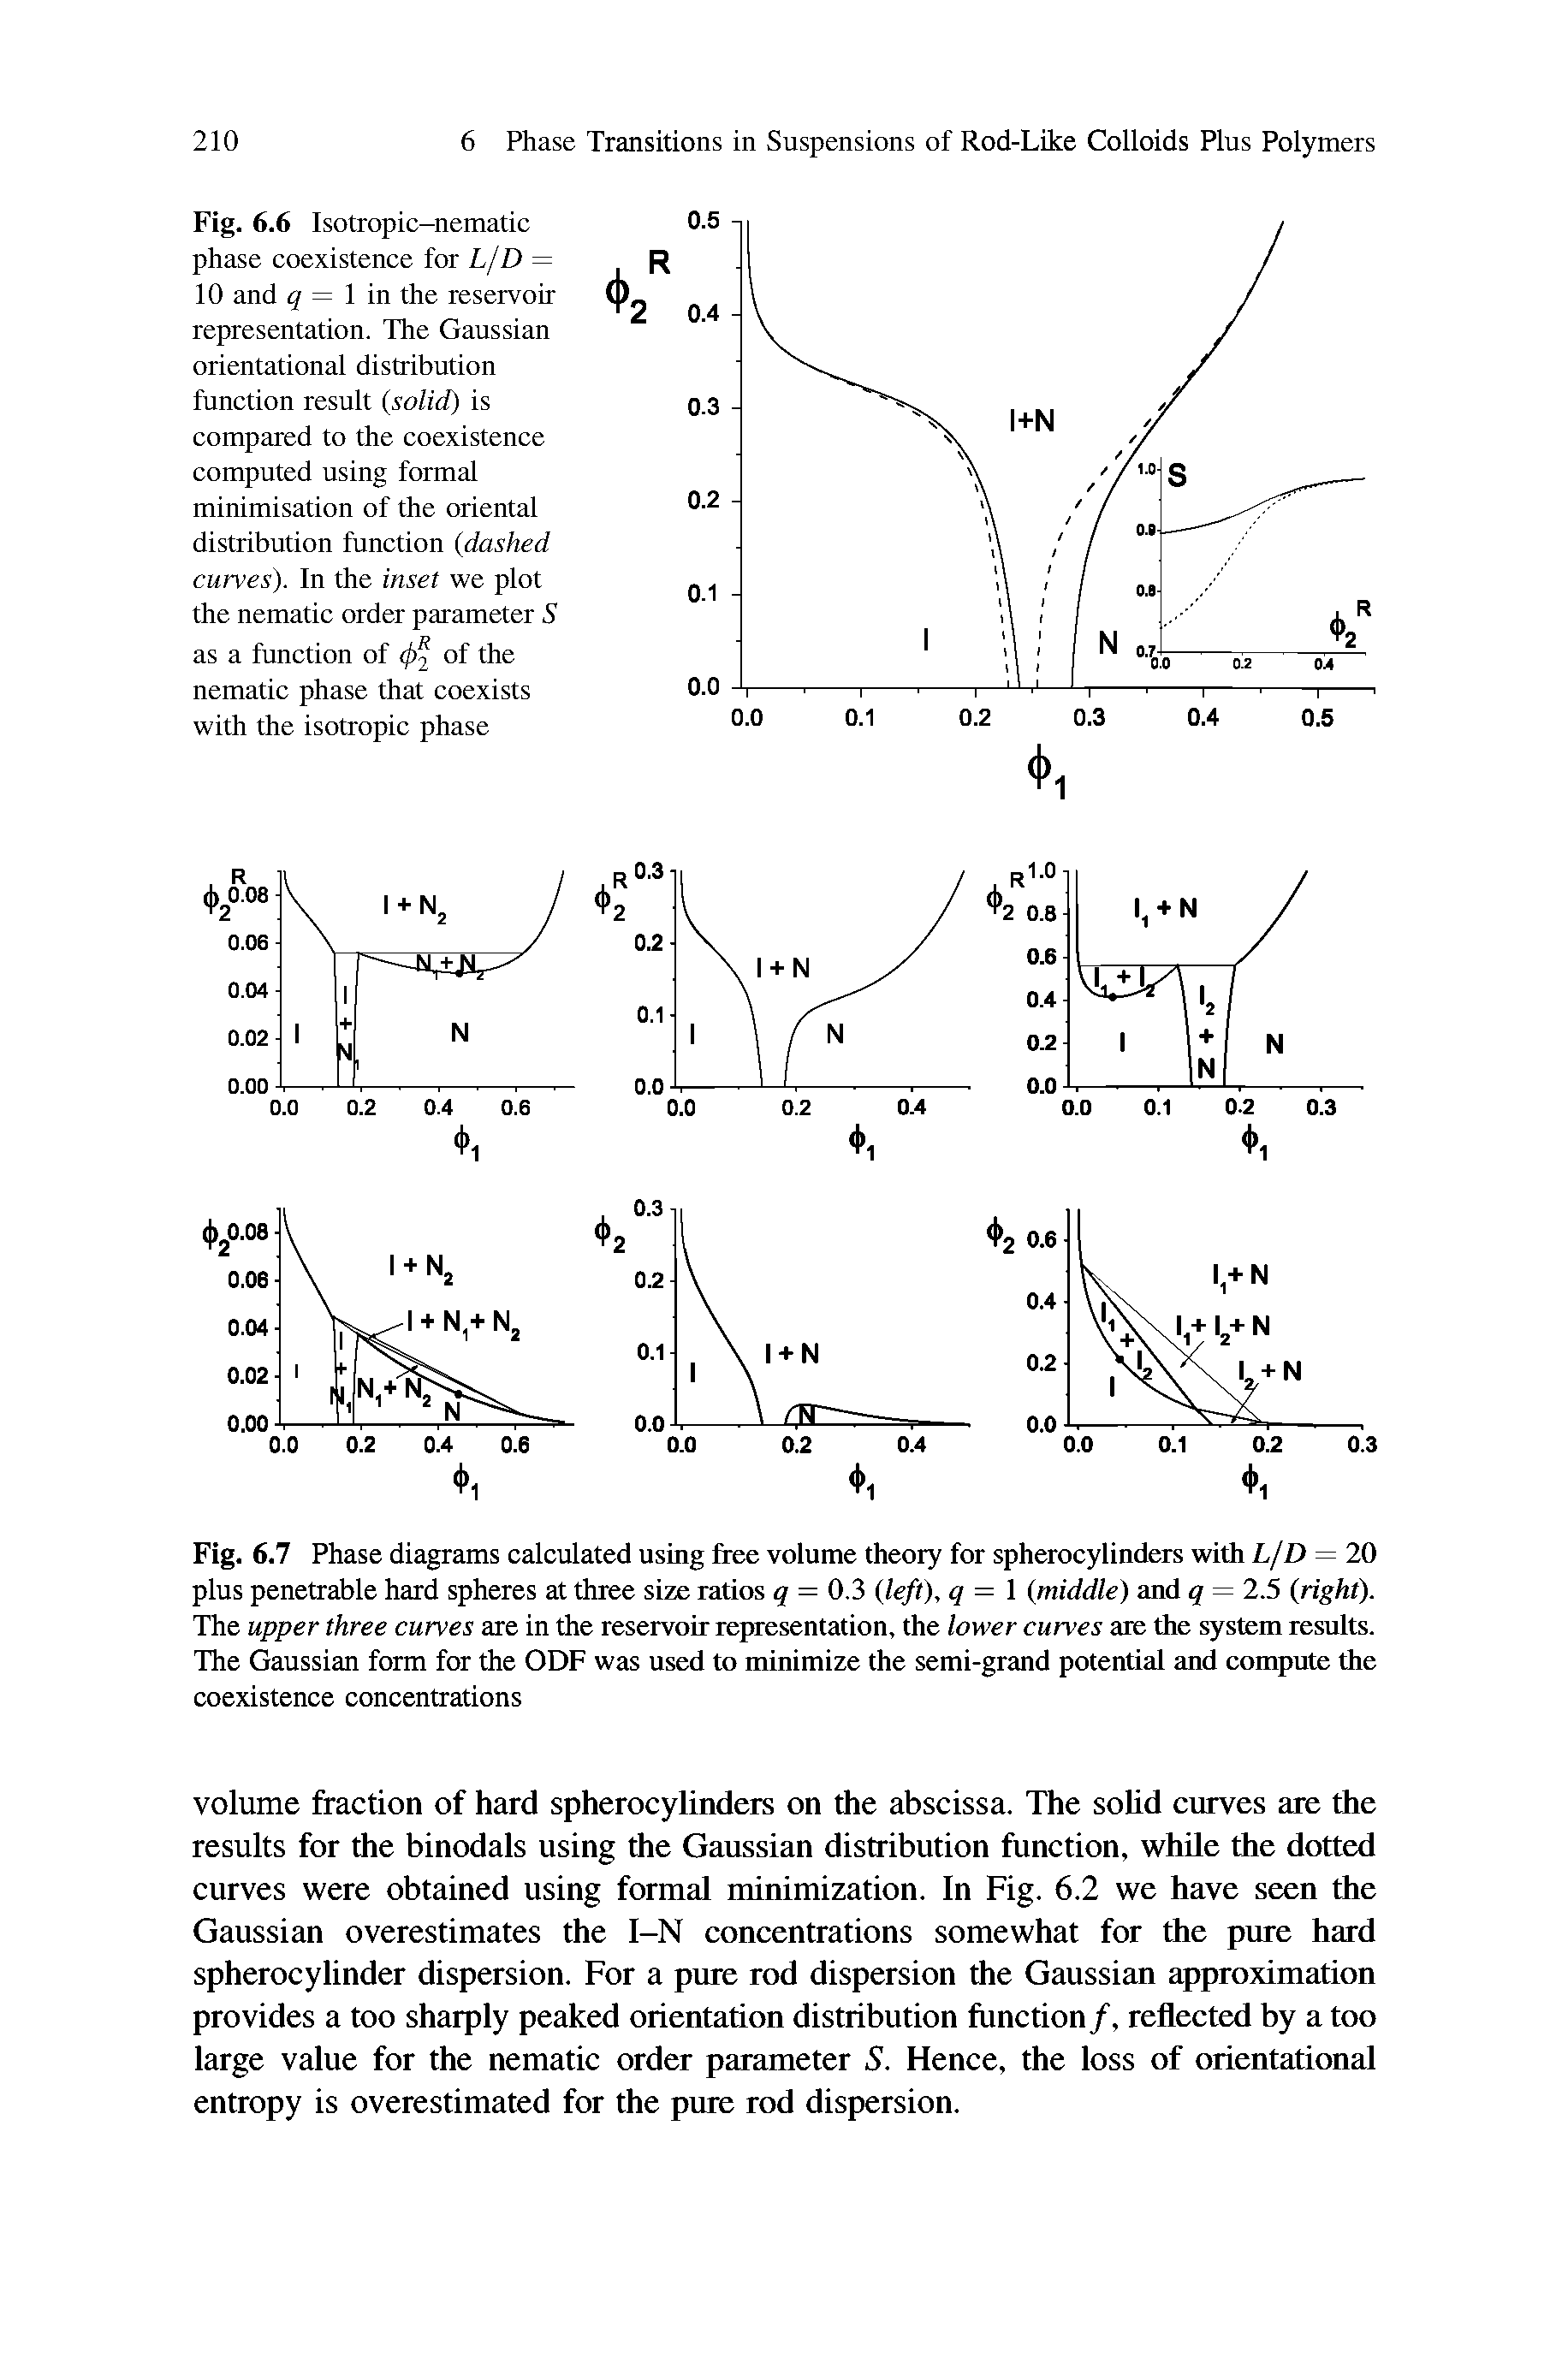 Fig. 6.6 Isotropic-nematic phase coexistence for L/D = 10 and q = I in the reservoir representation. The Gaussian orientational distribution function result (solid) is compared to the coexistence computed using formal minimisation of the oriental distribution function (dashed curves). In the inset we plot the nematic order parameter S as a function of (f>2 °f the nematic phase that coexists with the isotropic phase...